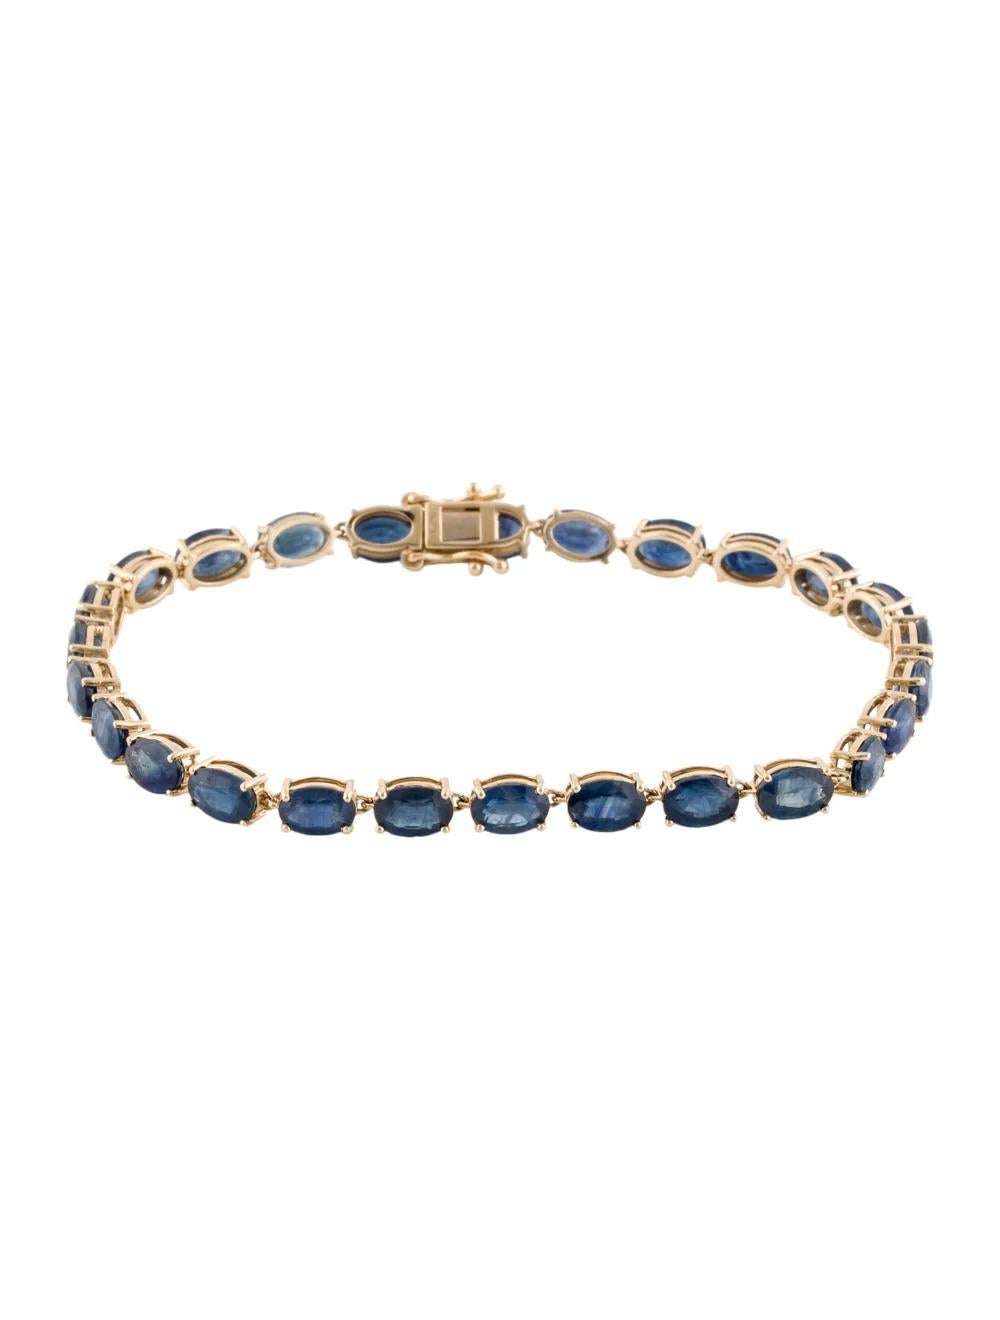 Indulge in opulent elegance with this exquisite 14K Yellow Gold Bracelet featuring a dazzling 15.60 Carat Oval Modified Brilliant Sapphire, radiating timeless sophistication and luxury.

Specifications:

* Metal Type: 14K Yellow Gold
* Gemstone:
*